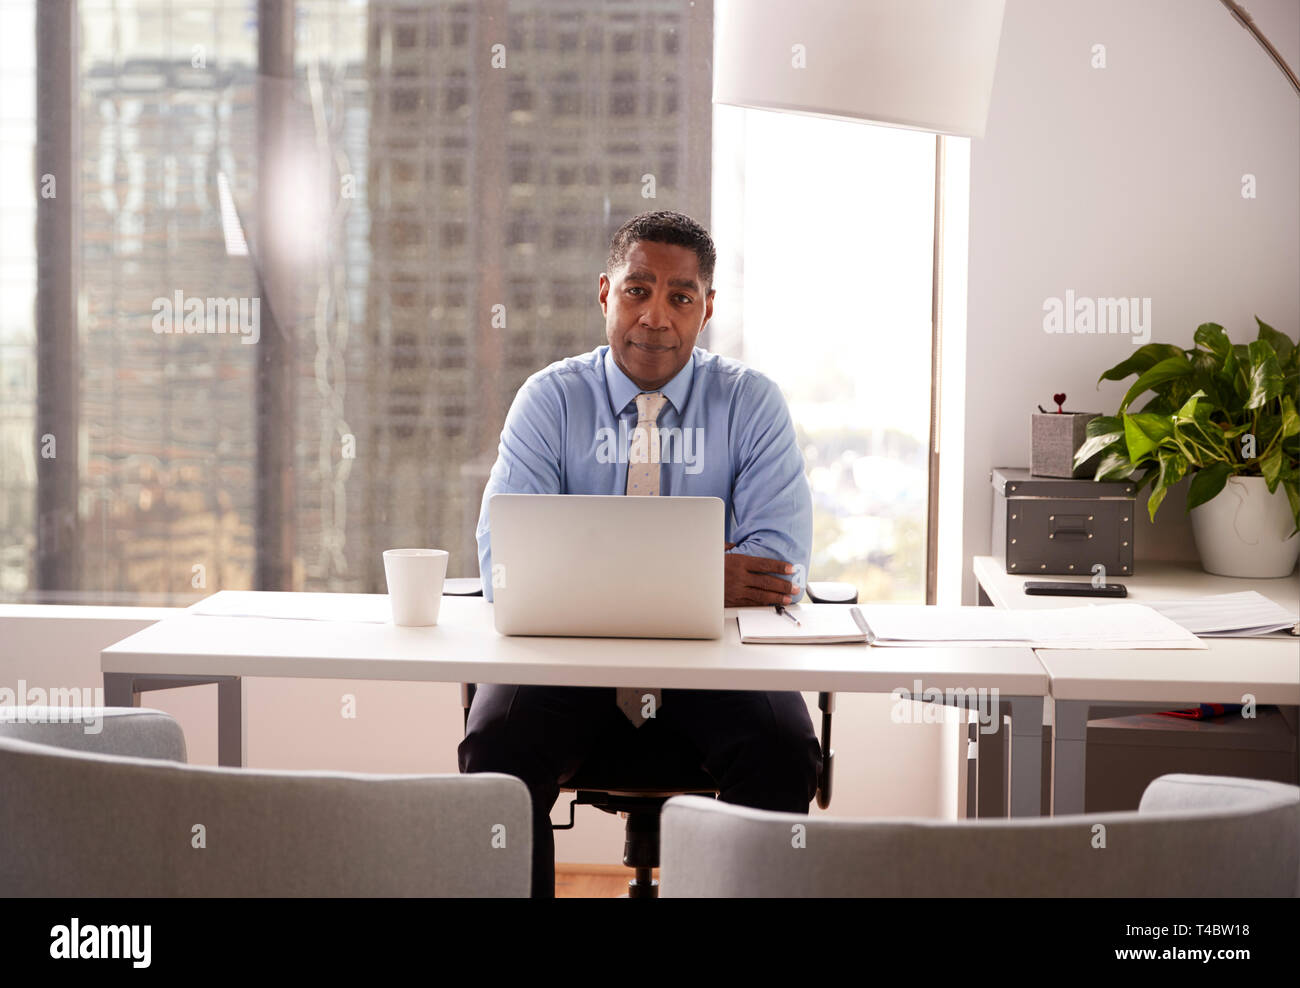 Portrait Of Male Financial Advisor In Modern Office Sitting At Desk Working On Laptop Stock Photo